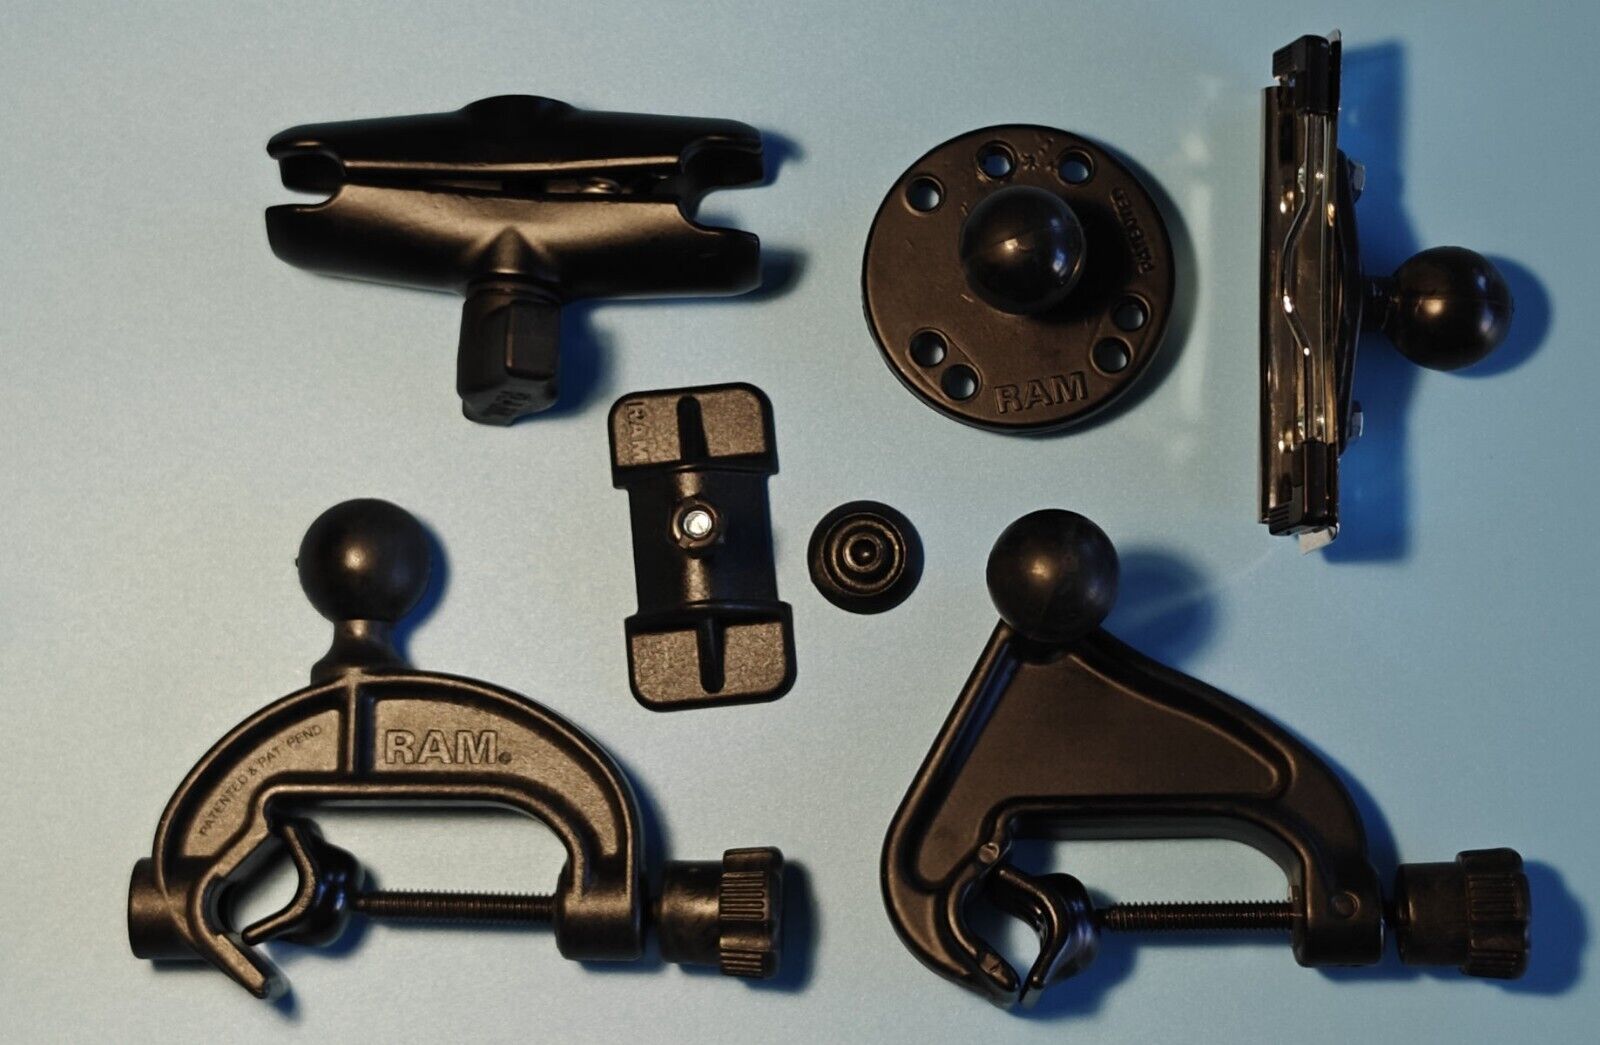 RAM Yoke Clamp Mounts (2) with various attachments for Aviation/Marine